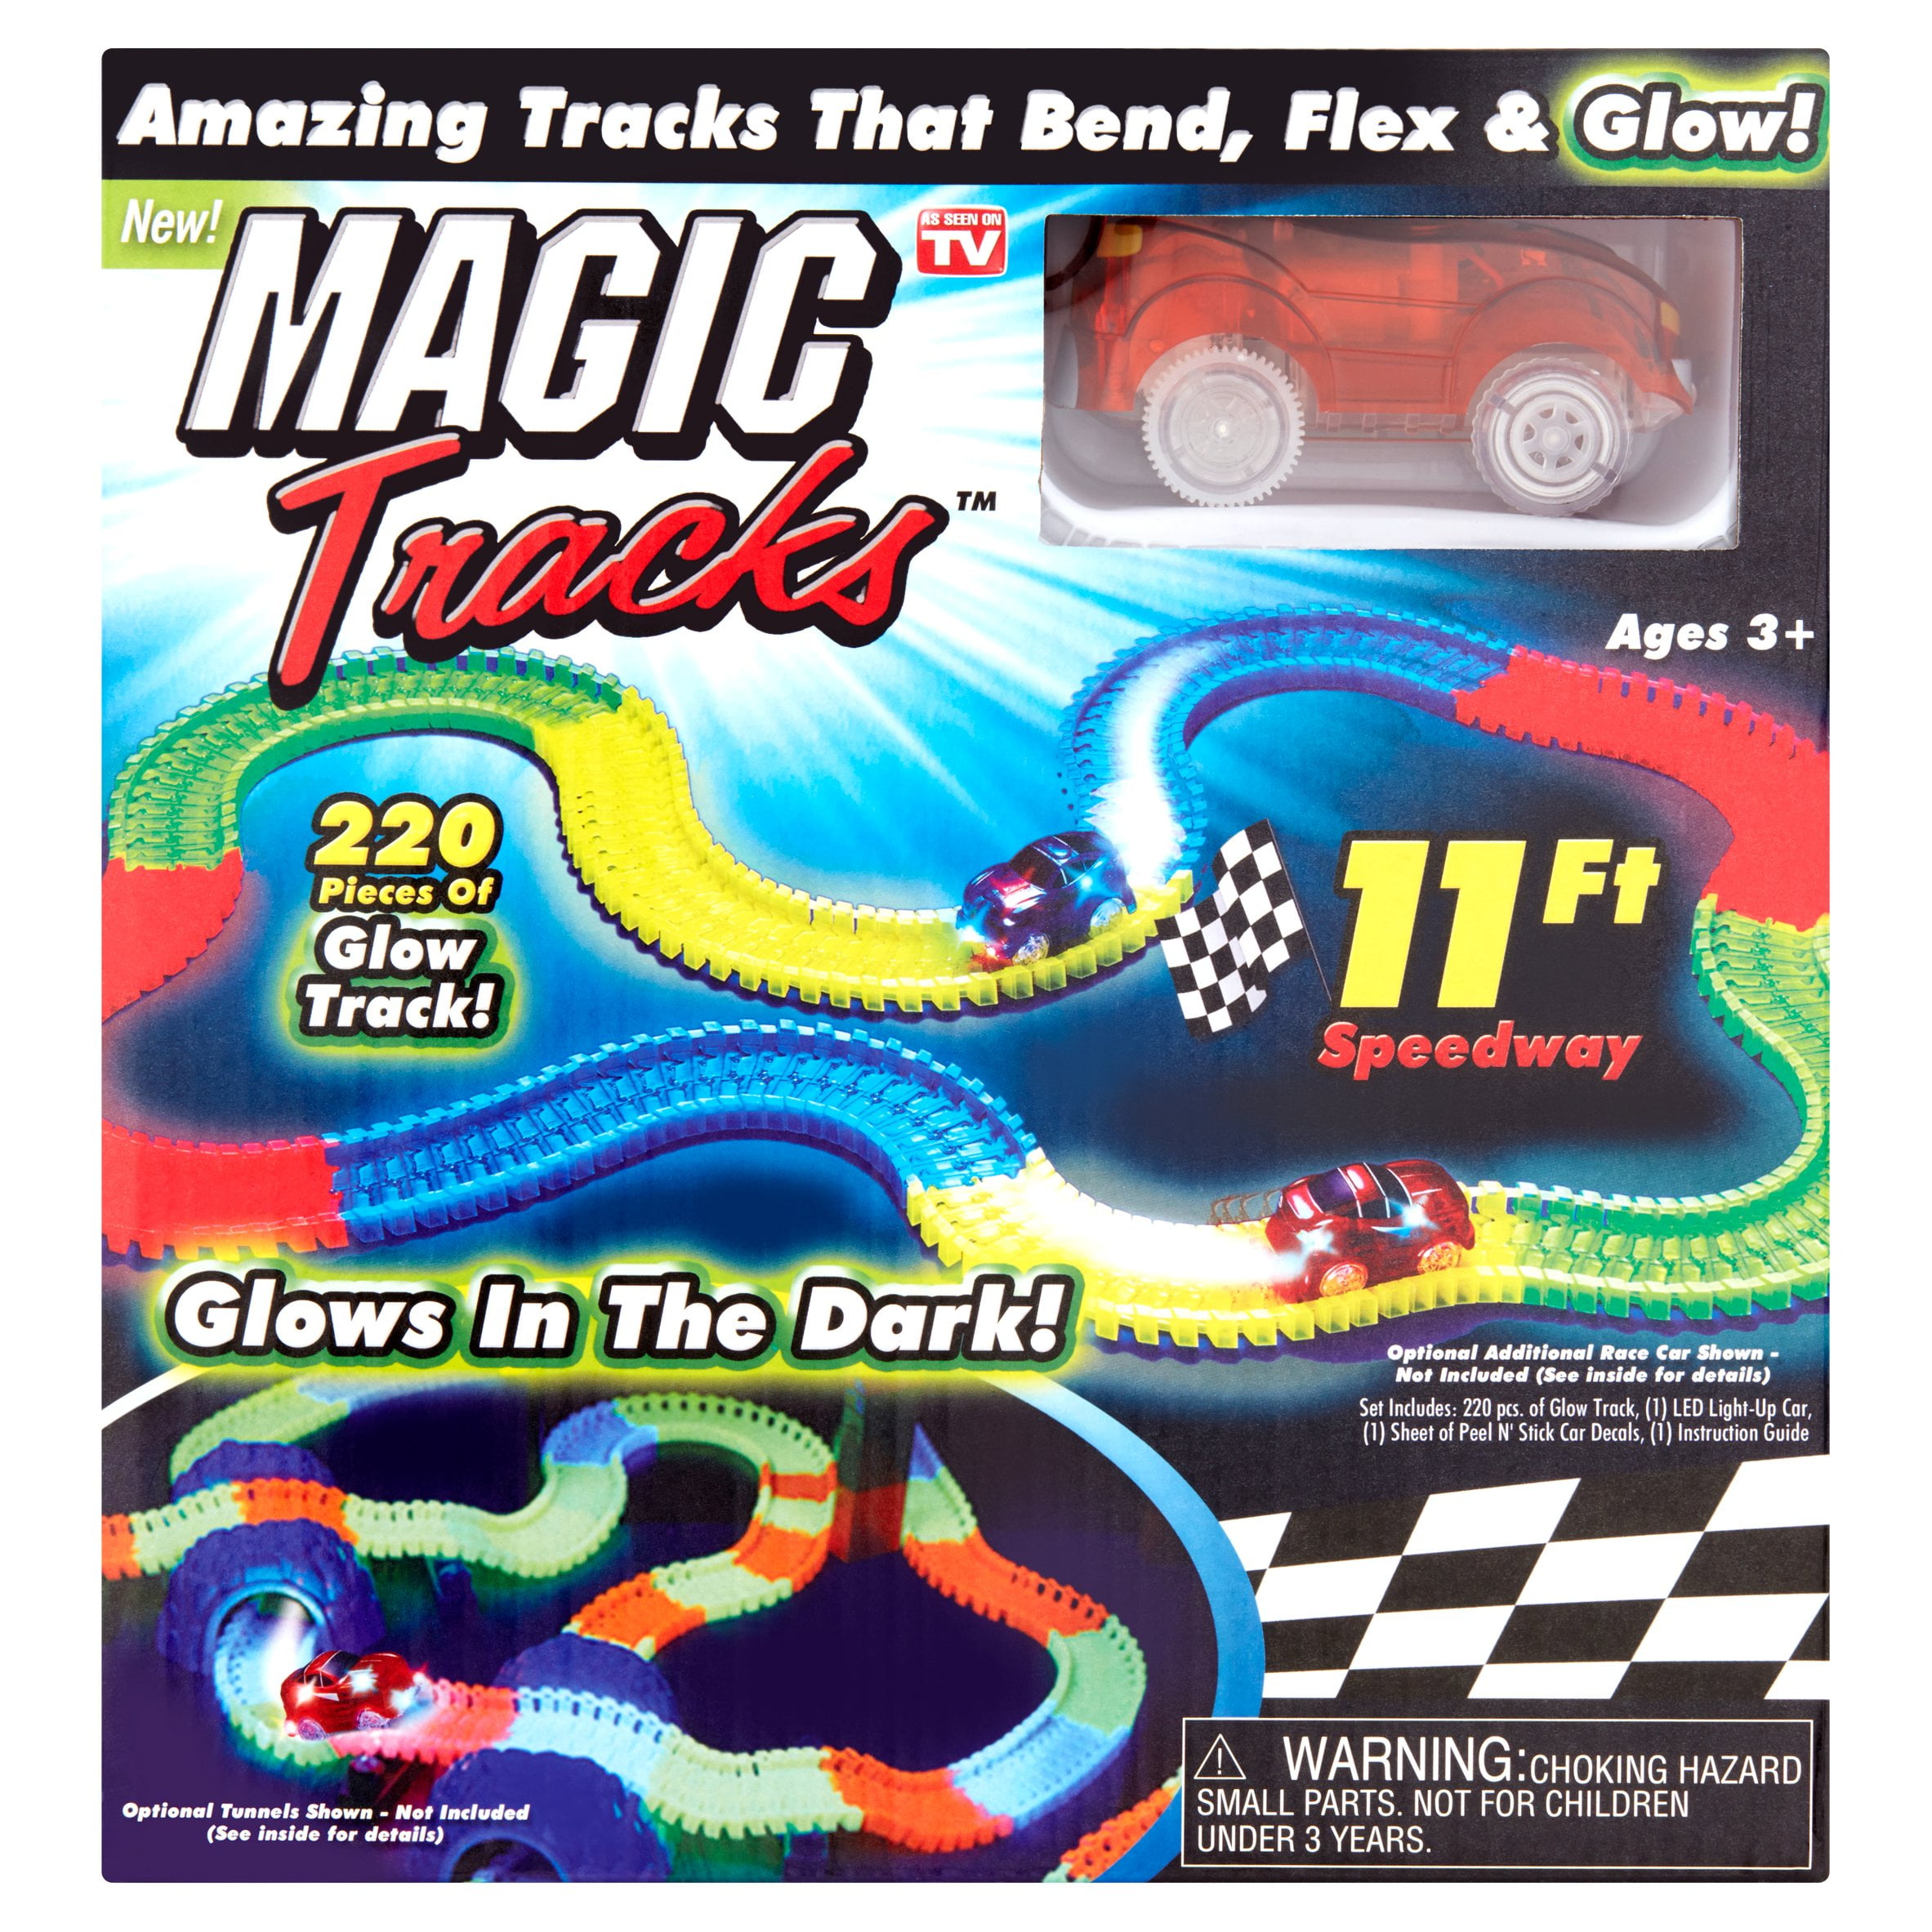 As Seen On TV Ontel Magic Tracks The Amazing Racetrack That Can Bend Flex and Glow